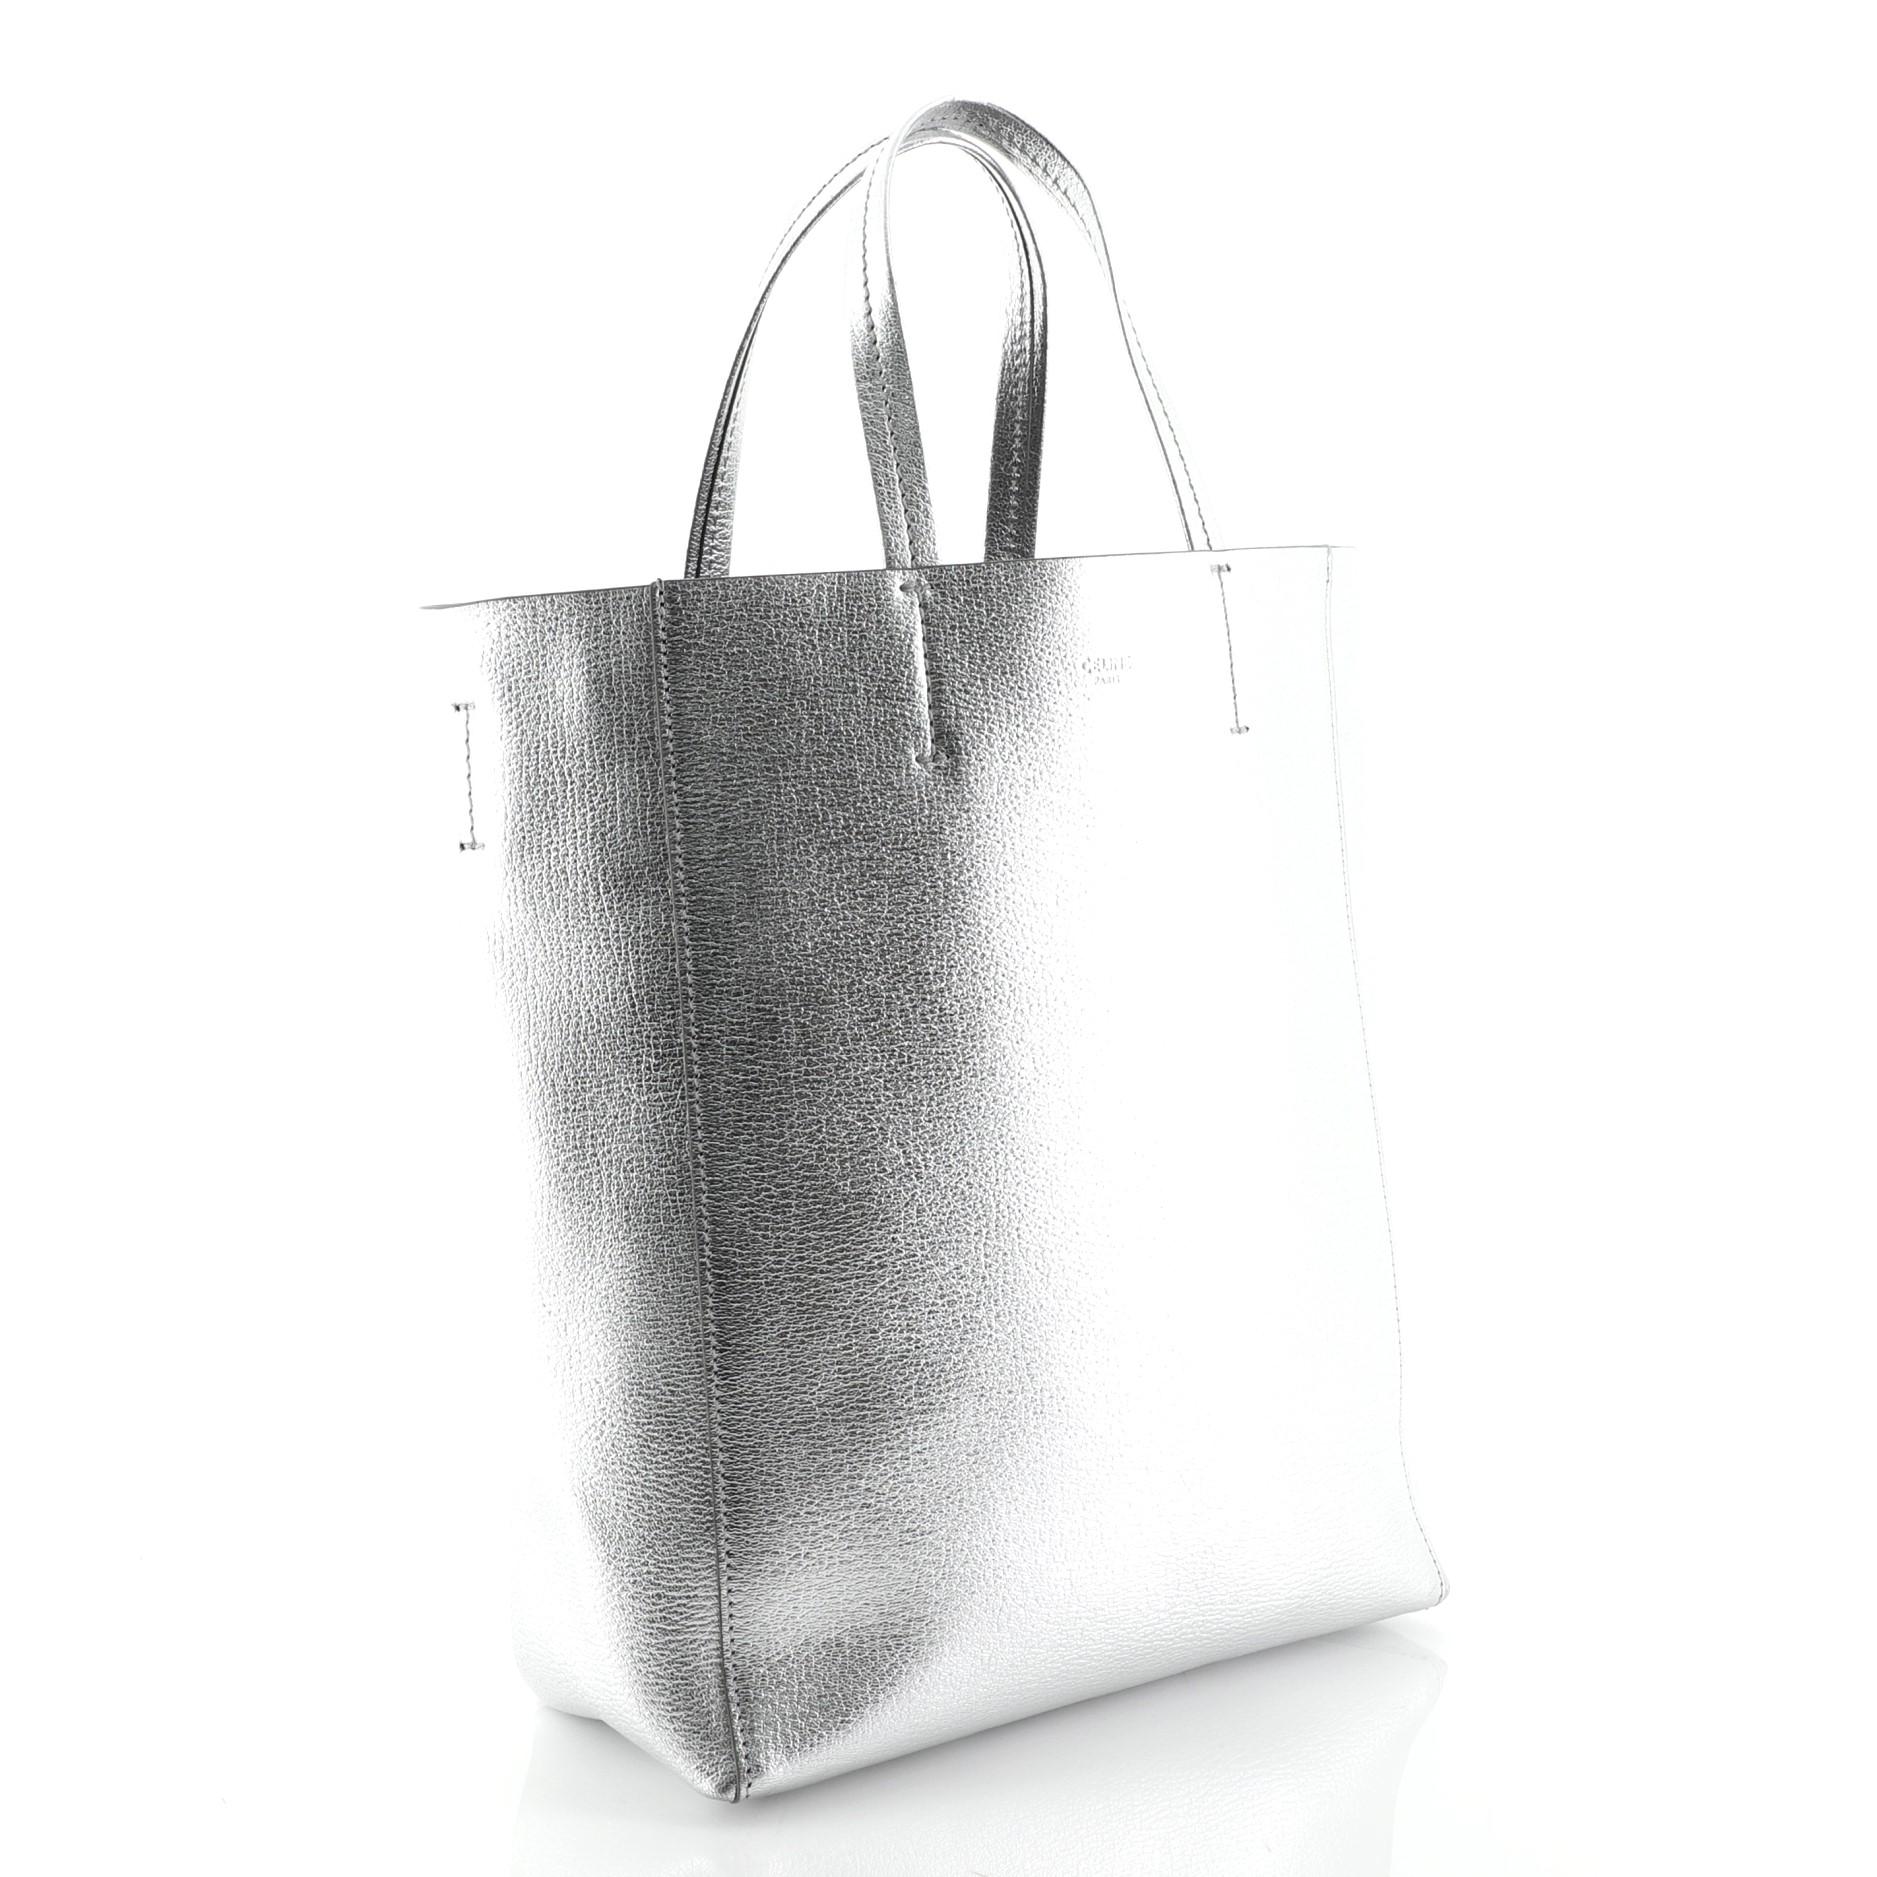 This Celine Vertical Cabas Tote Grained Calfskin Small, crafted in silver grained calfskin leather, features leather top handles, Celine stamped logo and silver-tone hardware. It opens to a black leather interior with side zip pocket. 

Estimated